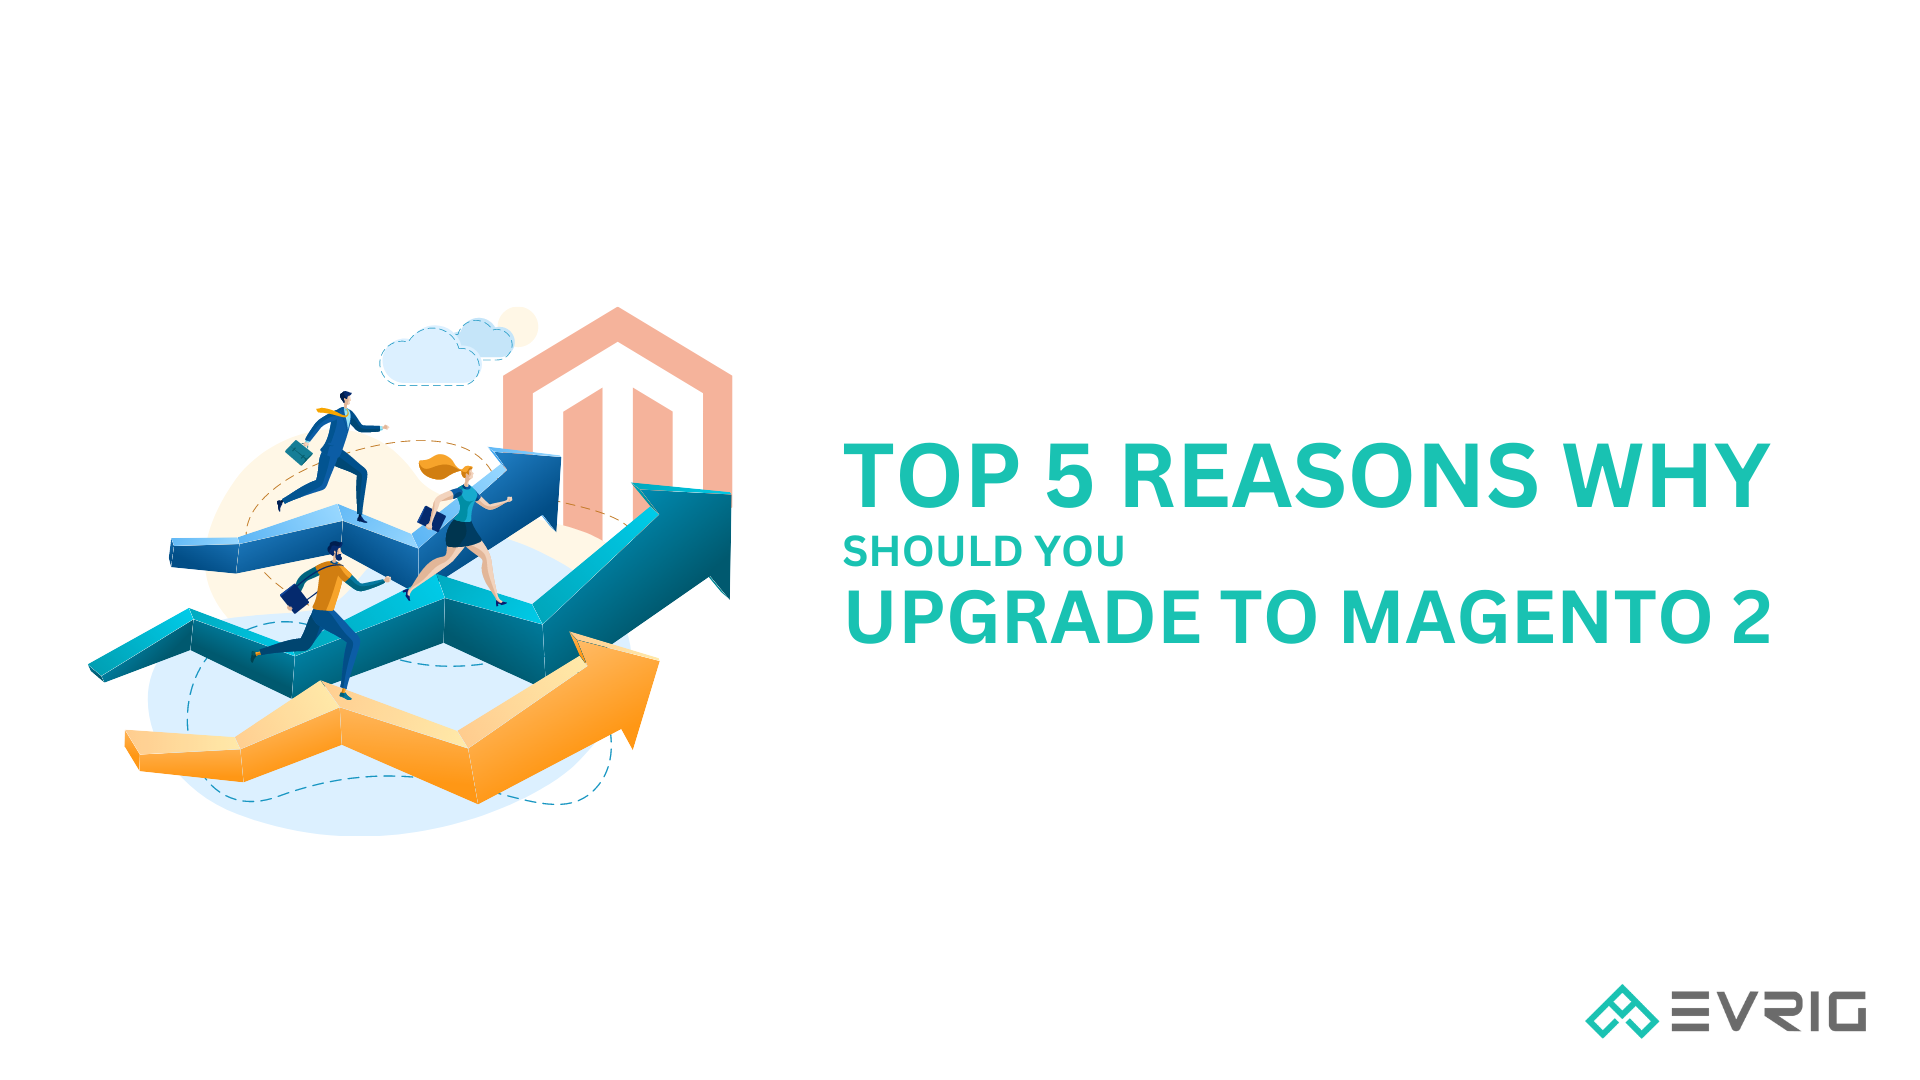 Why Should You Upgrade to Magento 2